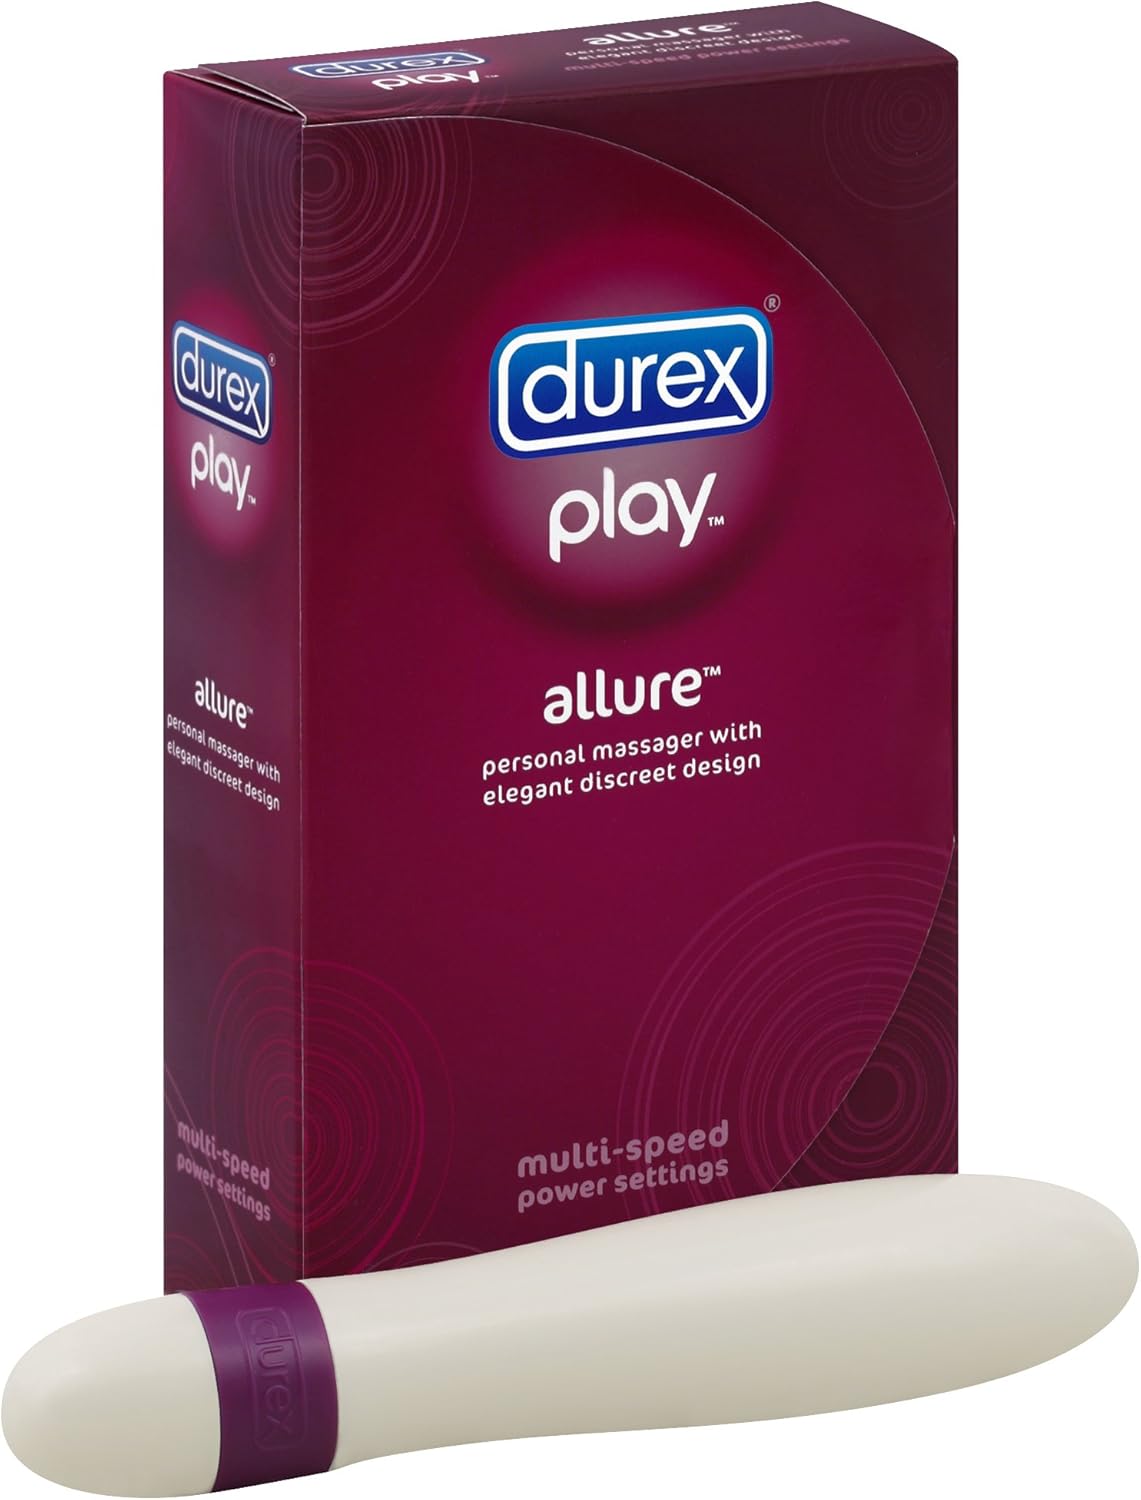 alison eden recommends play allure personal massager pic